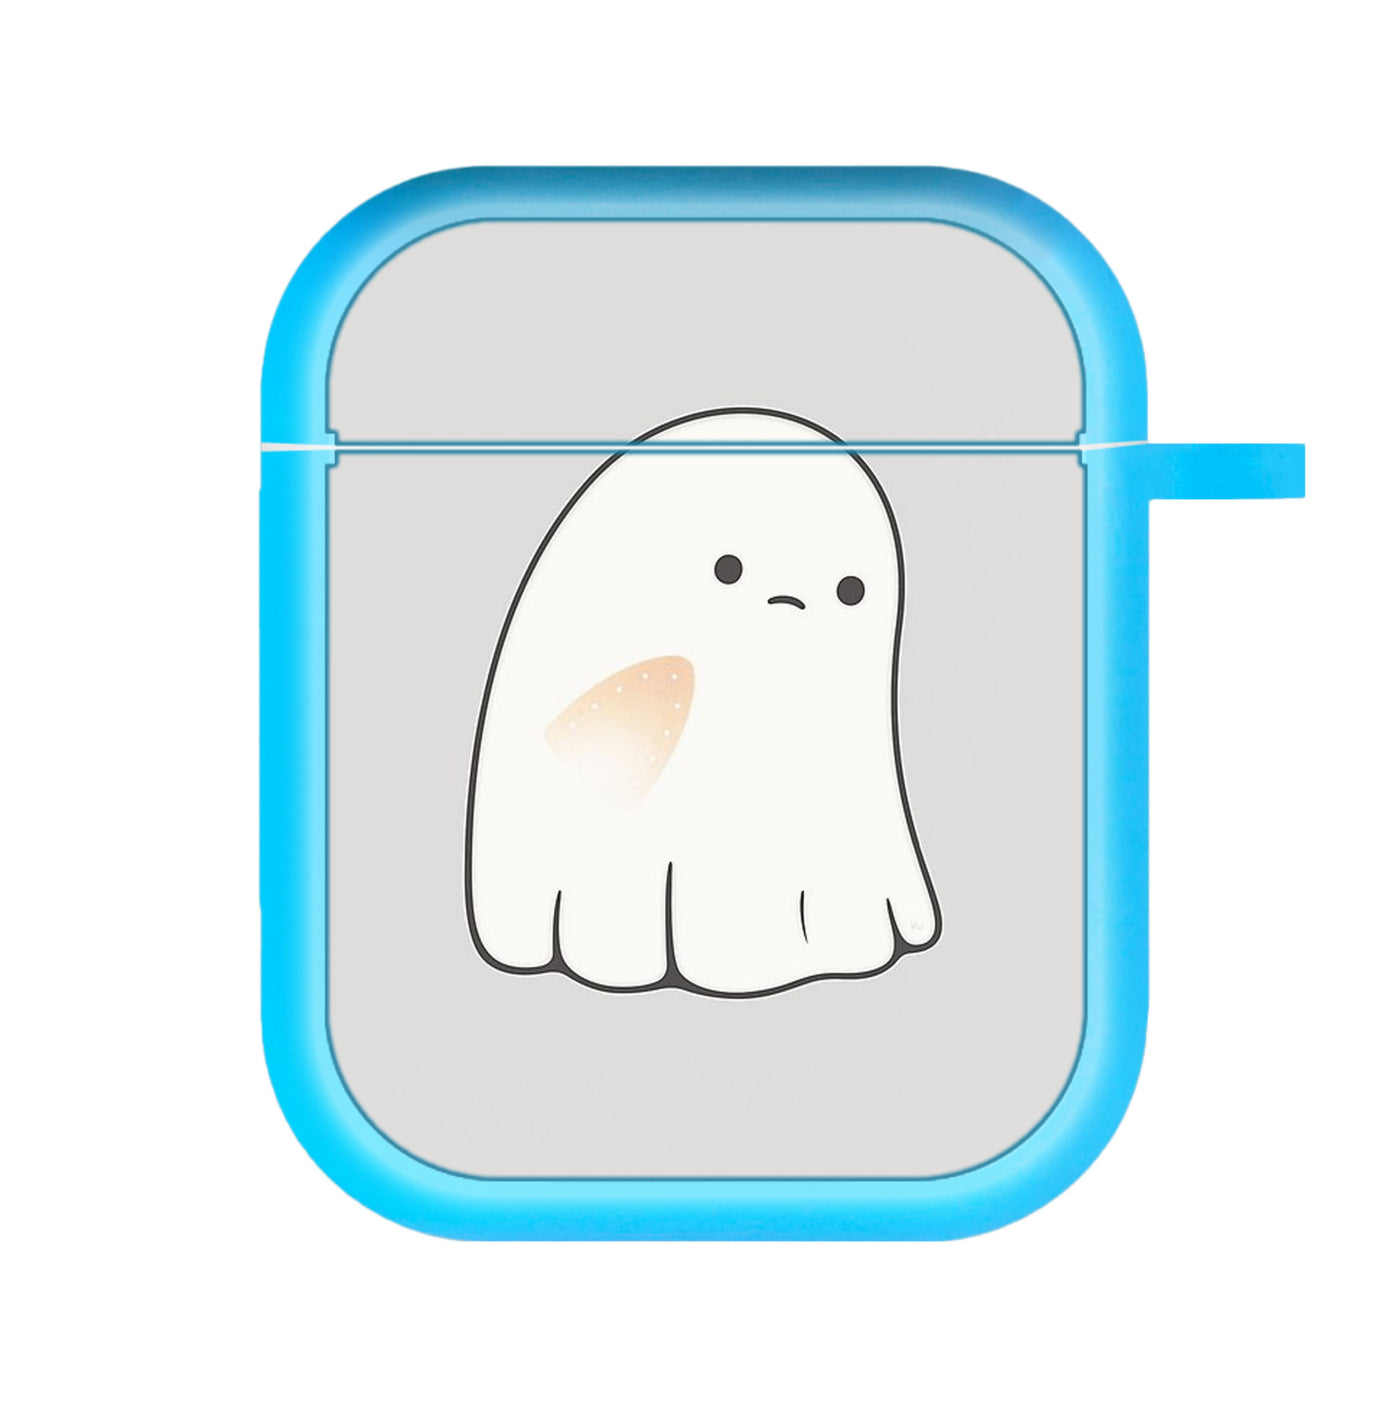 Sad Ghost Halloween AirPods Case